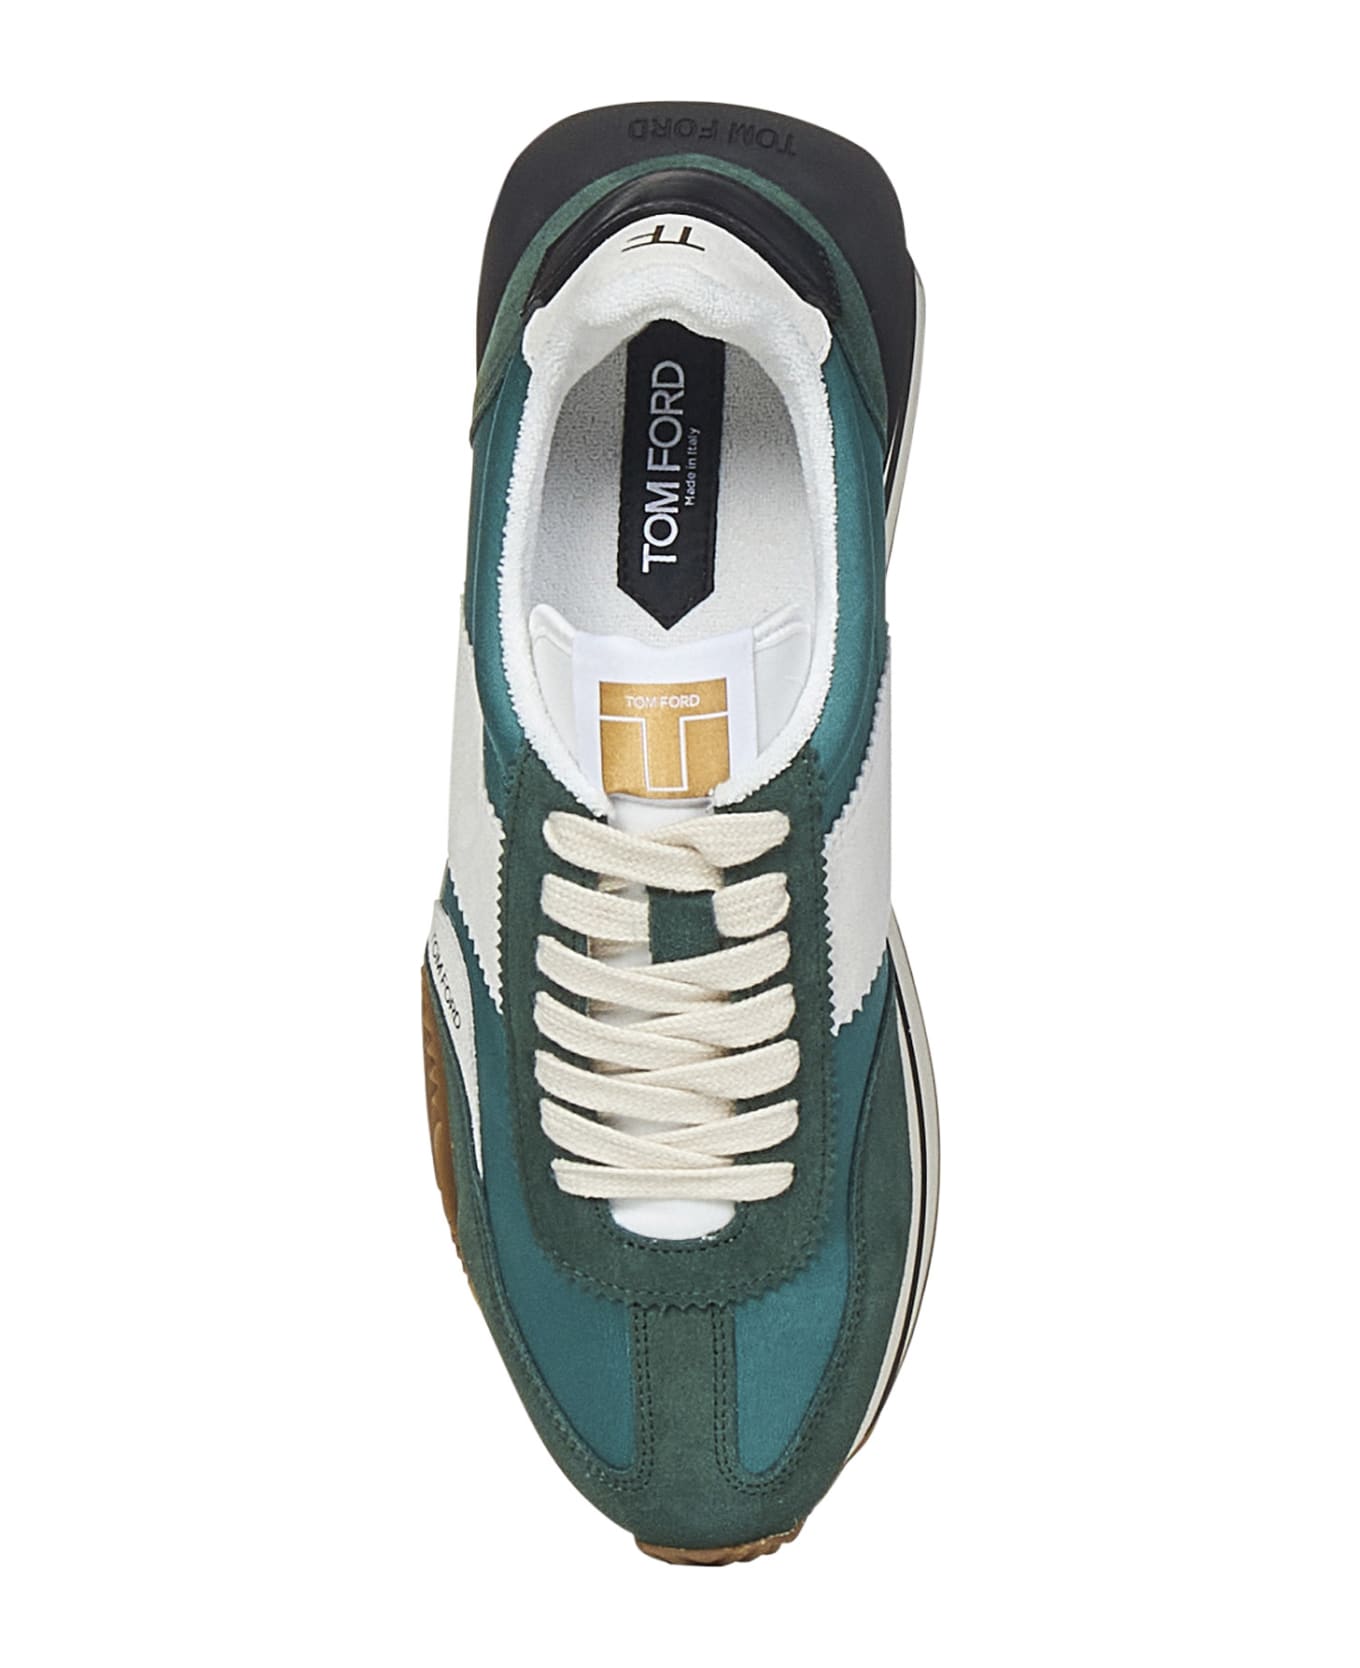 Tom Ford James Sneakers - Green スニーカー